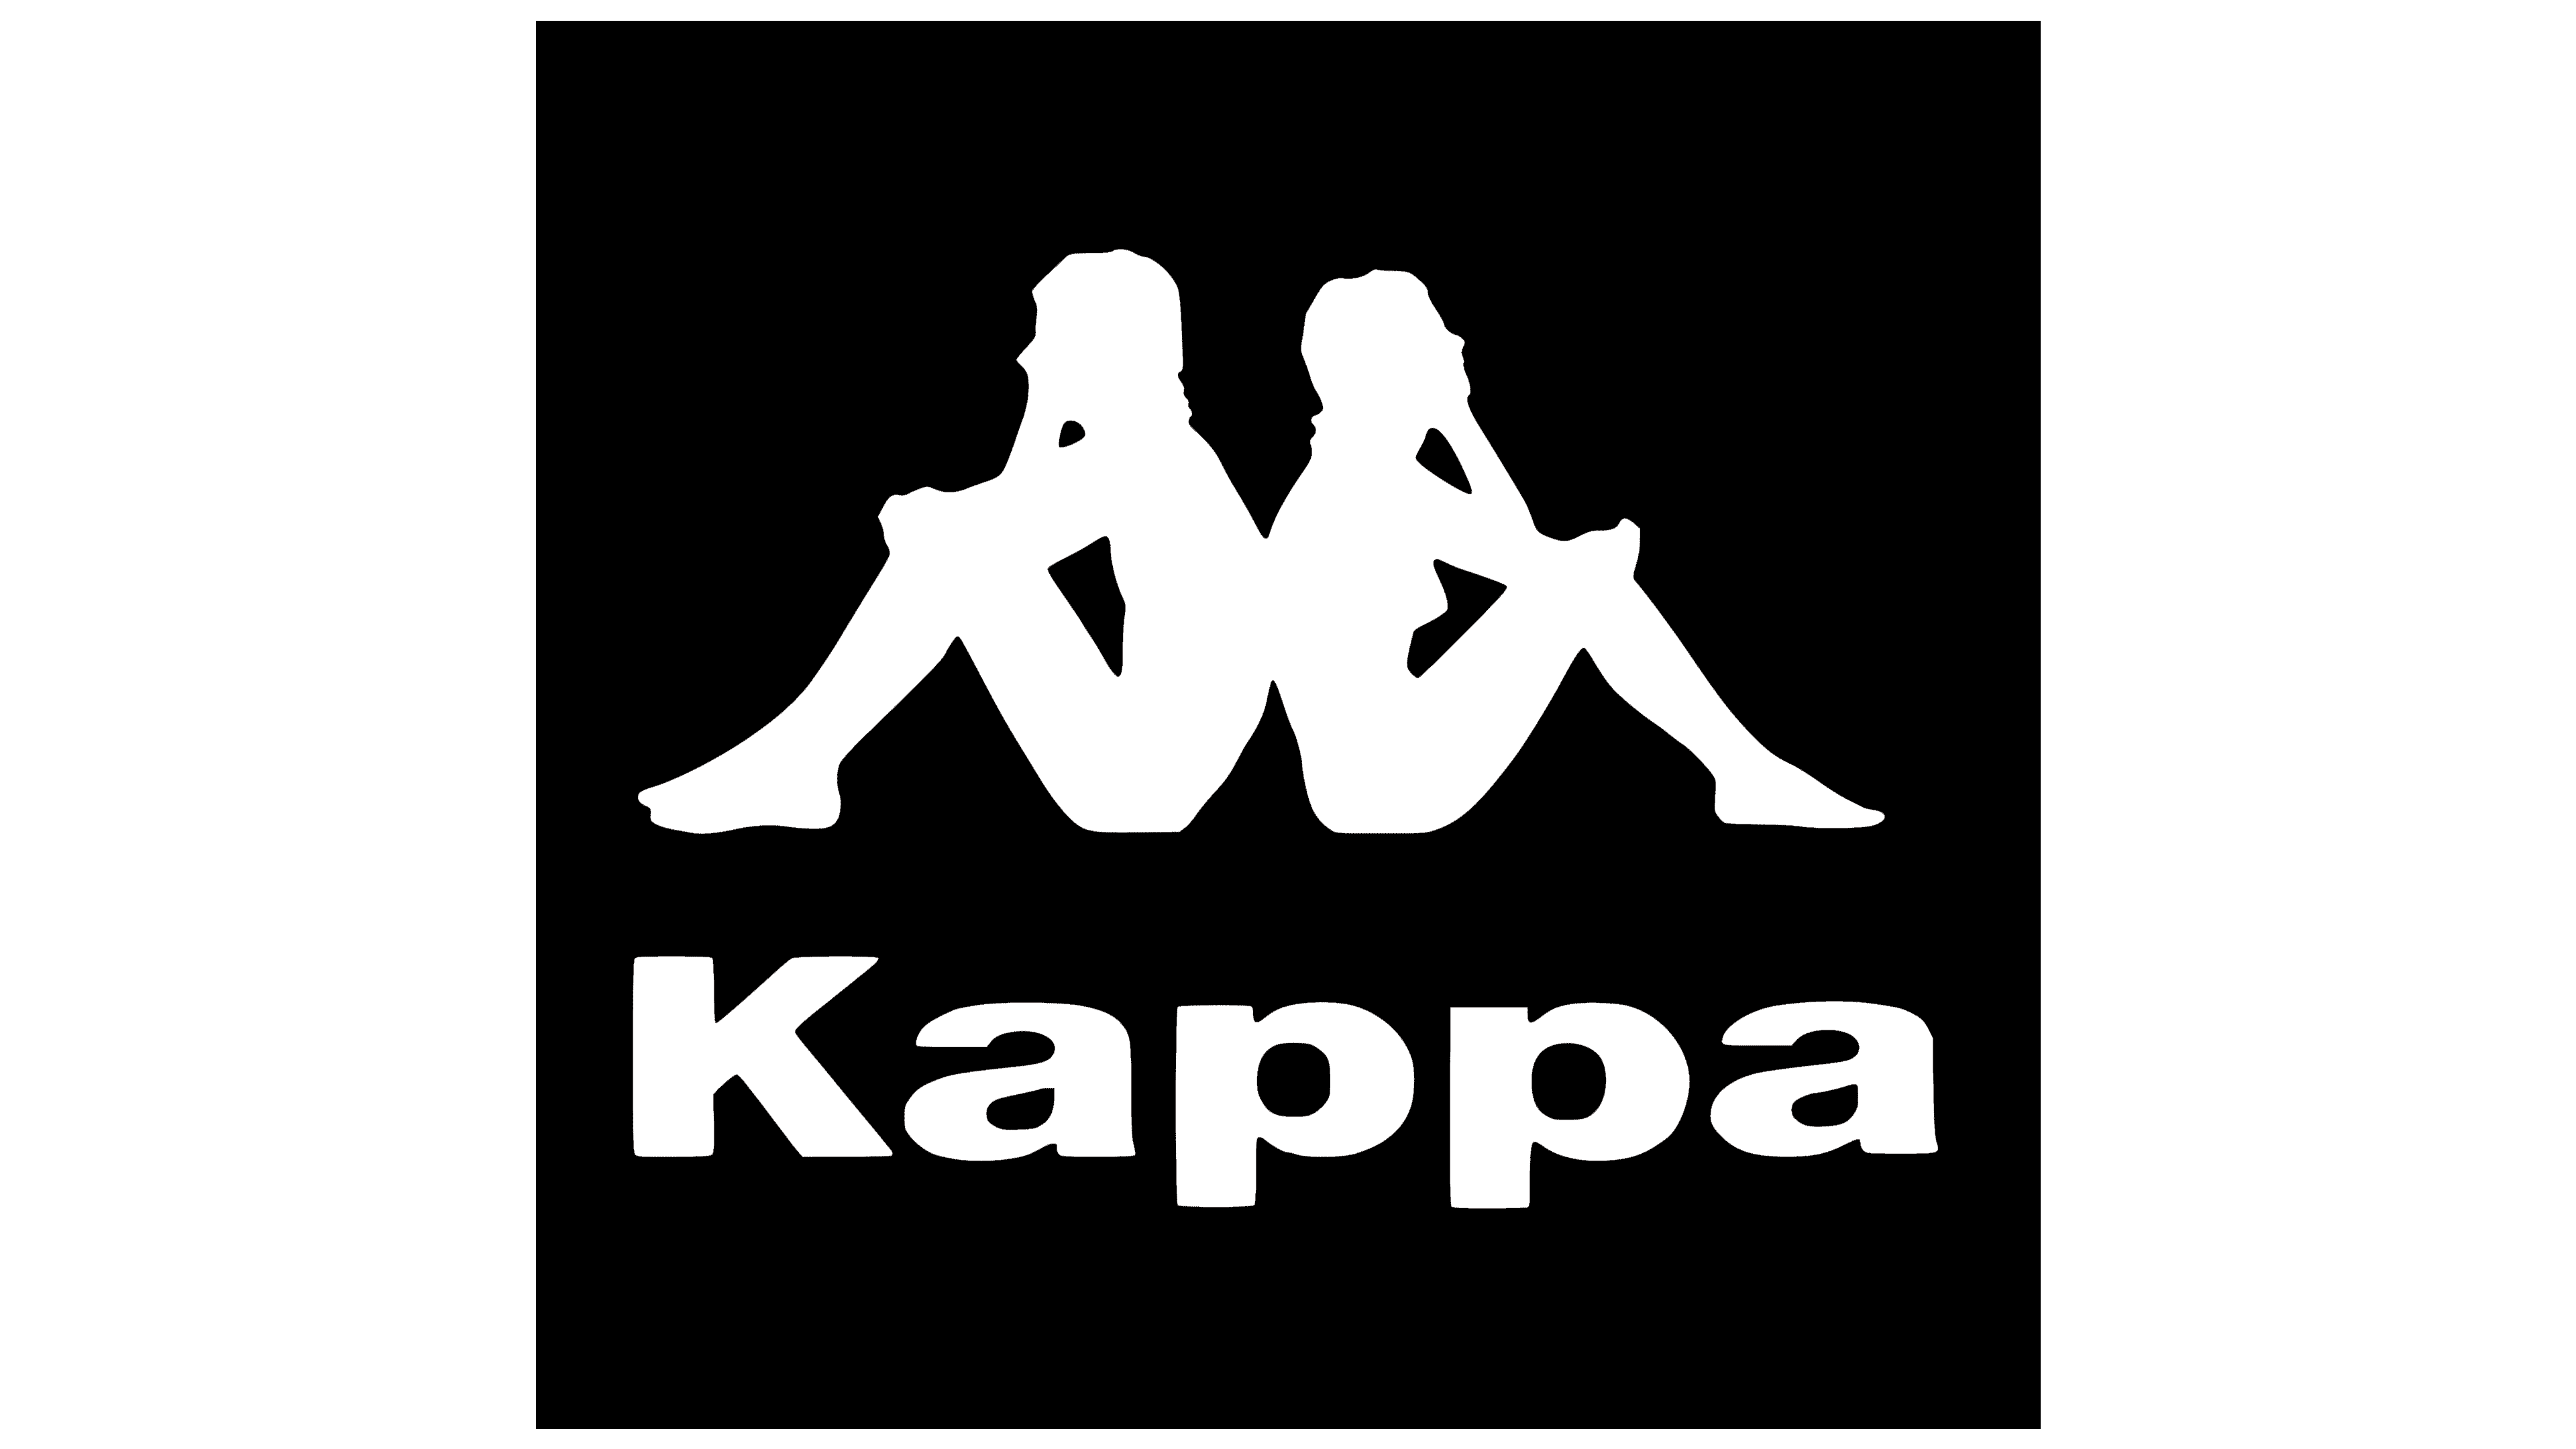 Kappa meaning